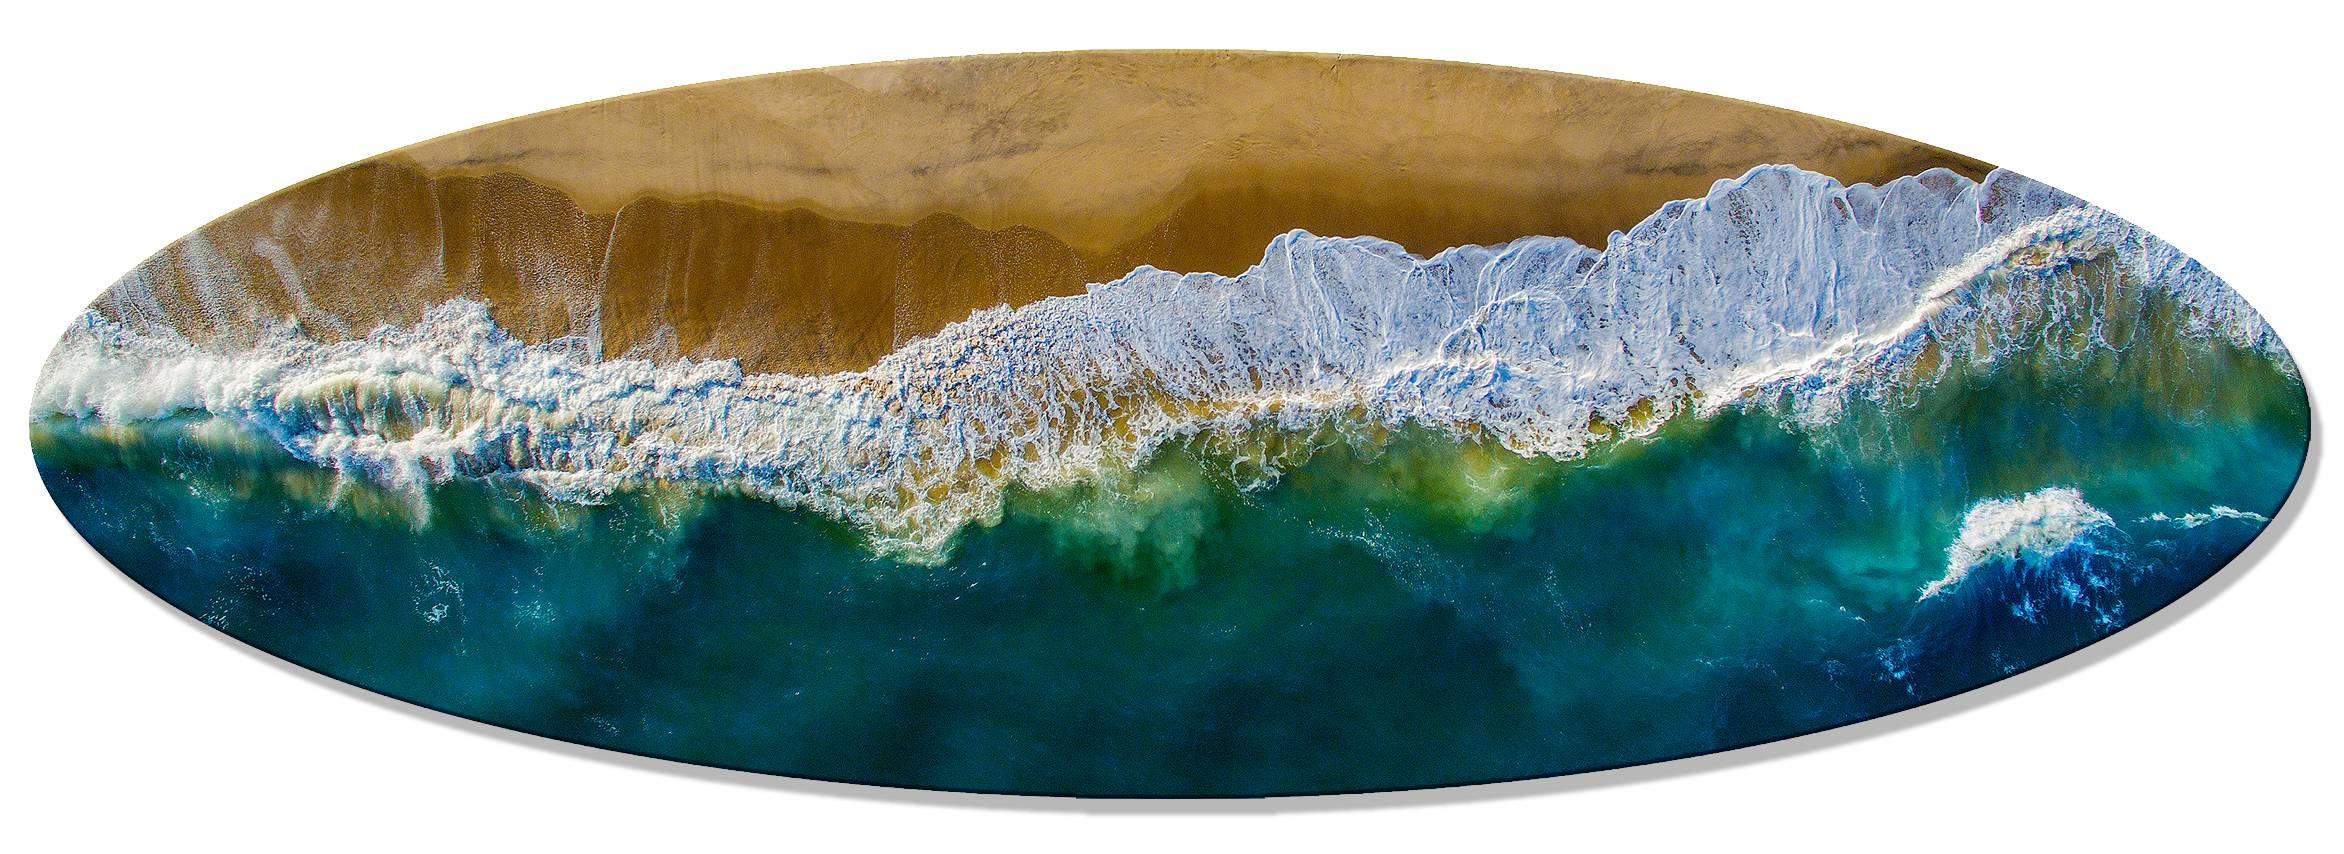 Albert Delamour Landscape Photograph - Surf in Montauk, wave, aerial view of the ocean and beach in Montauk